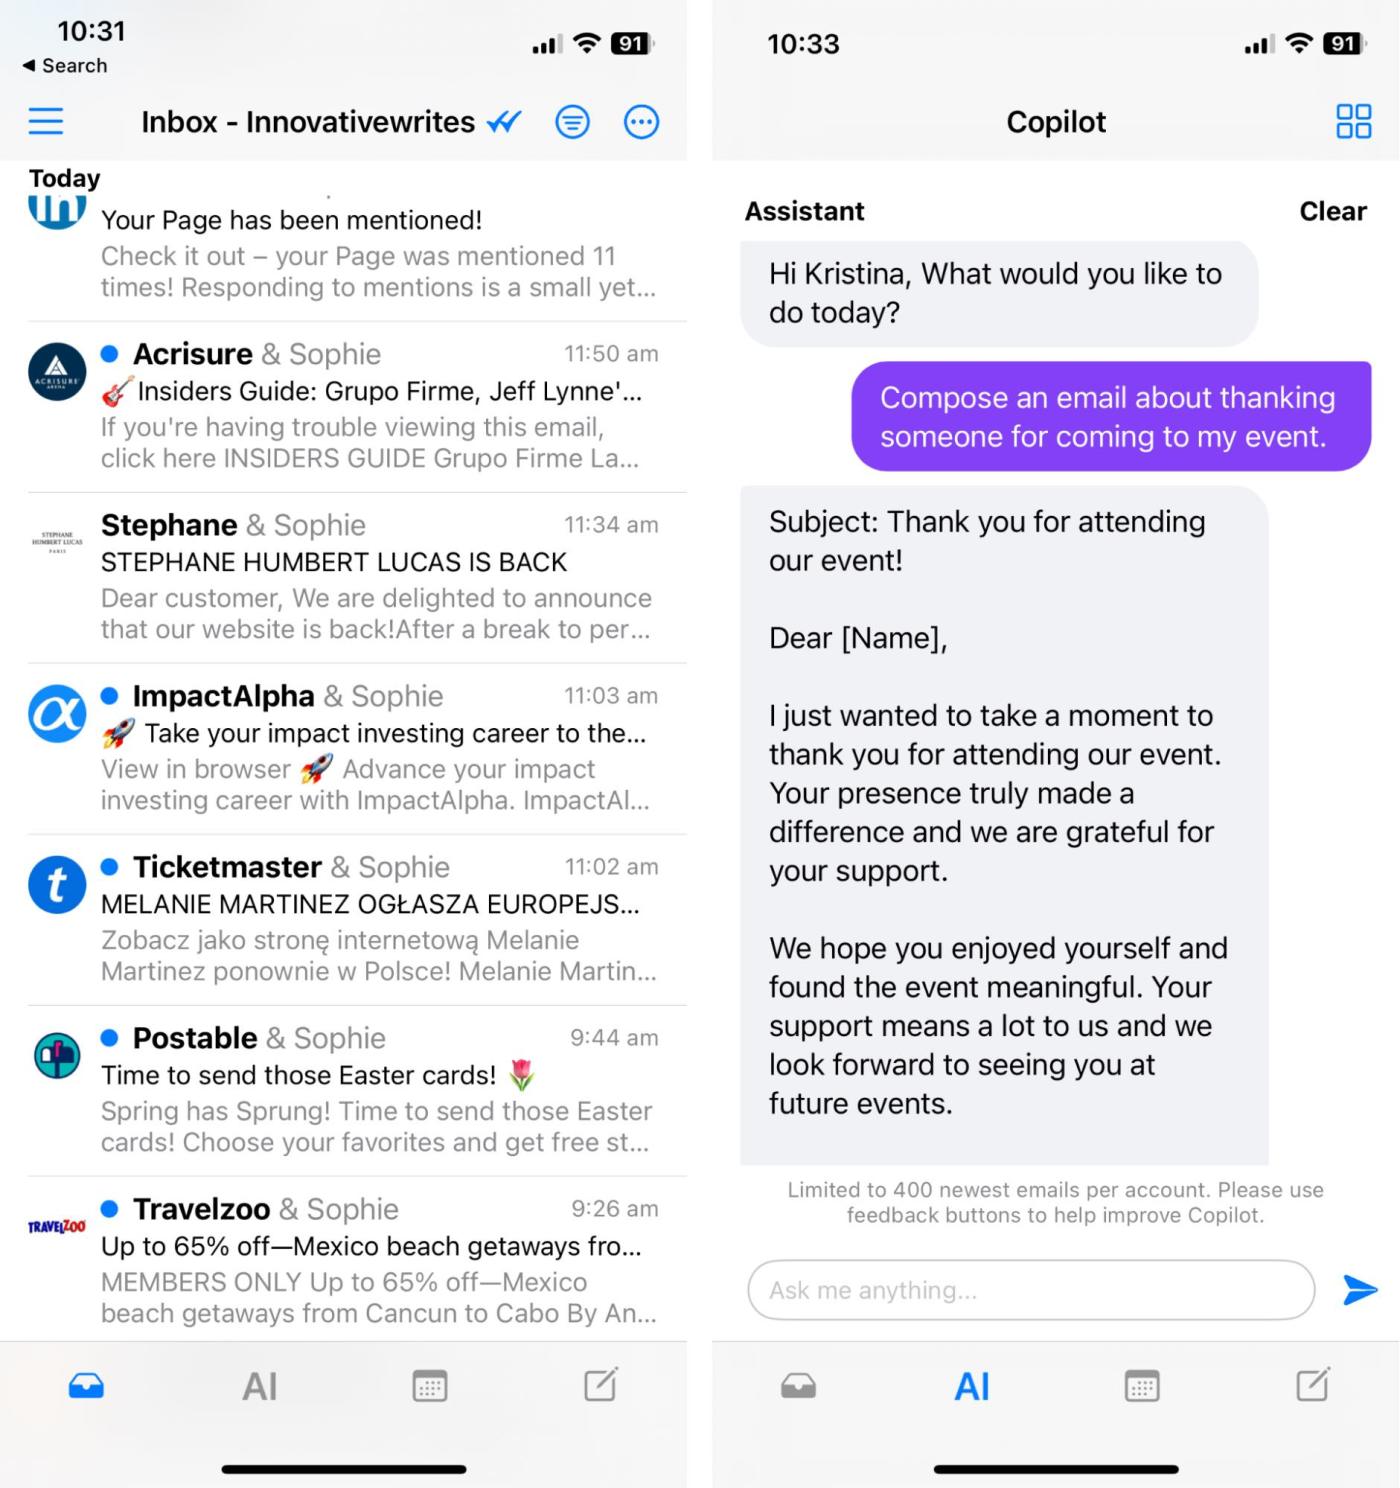 Canary, our pick for the best iPhone email app for writing emails with AI